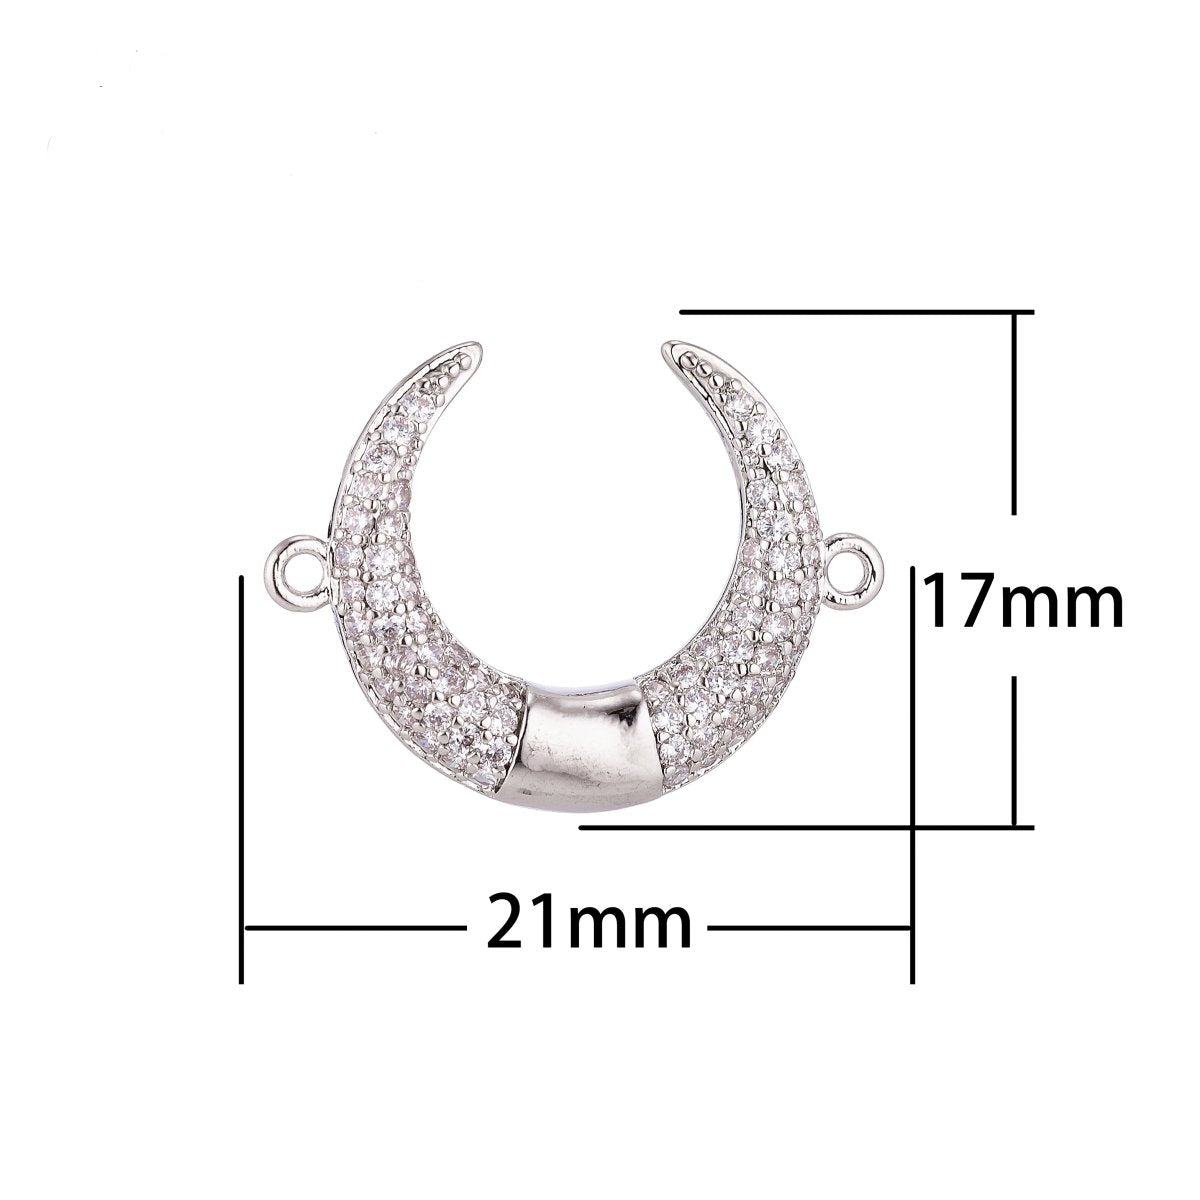 OS On Sale! CLEARANCE ! 18K Gold Filled Dainty Crescent Moon Double Bail Charm Connector Pendant for Layer Choker Necklace Bracelet Bead Finding Jewelry Making, White Gold Filled, Rose Gold Filled, Gun Metal Plated | F-023 - DLUXCA